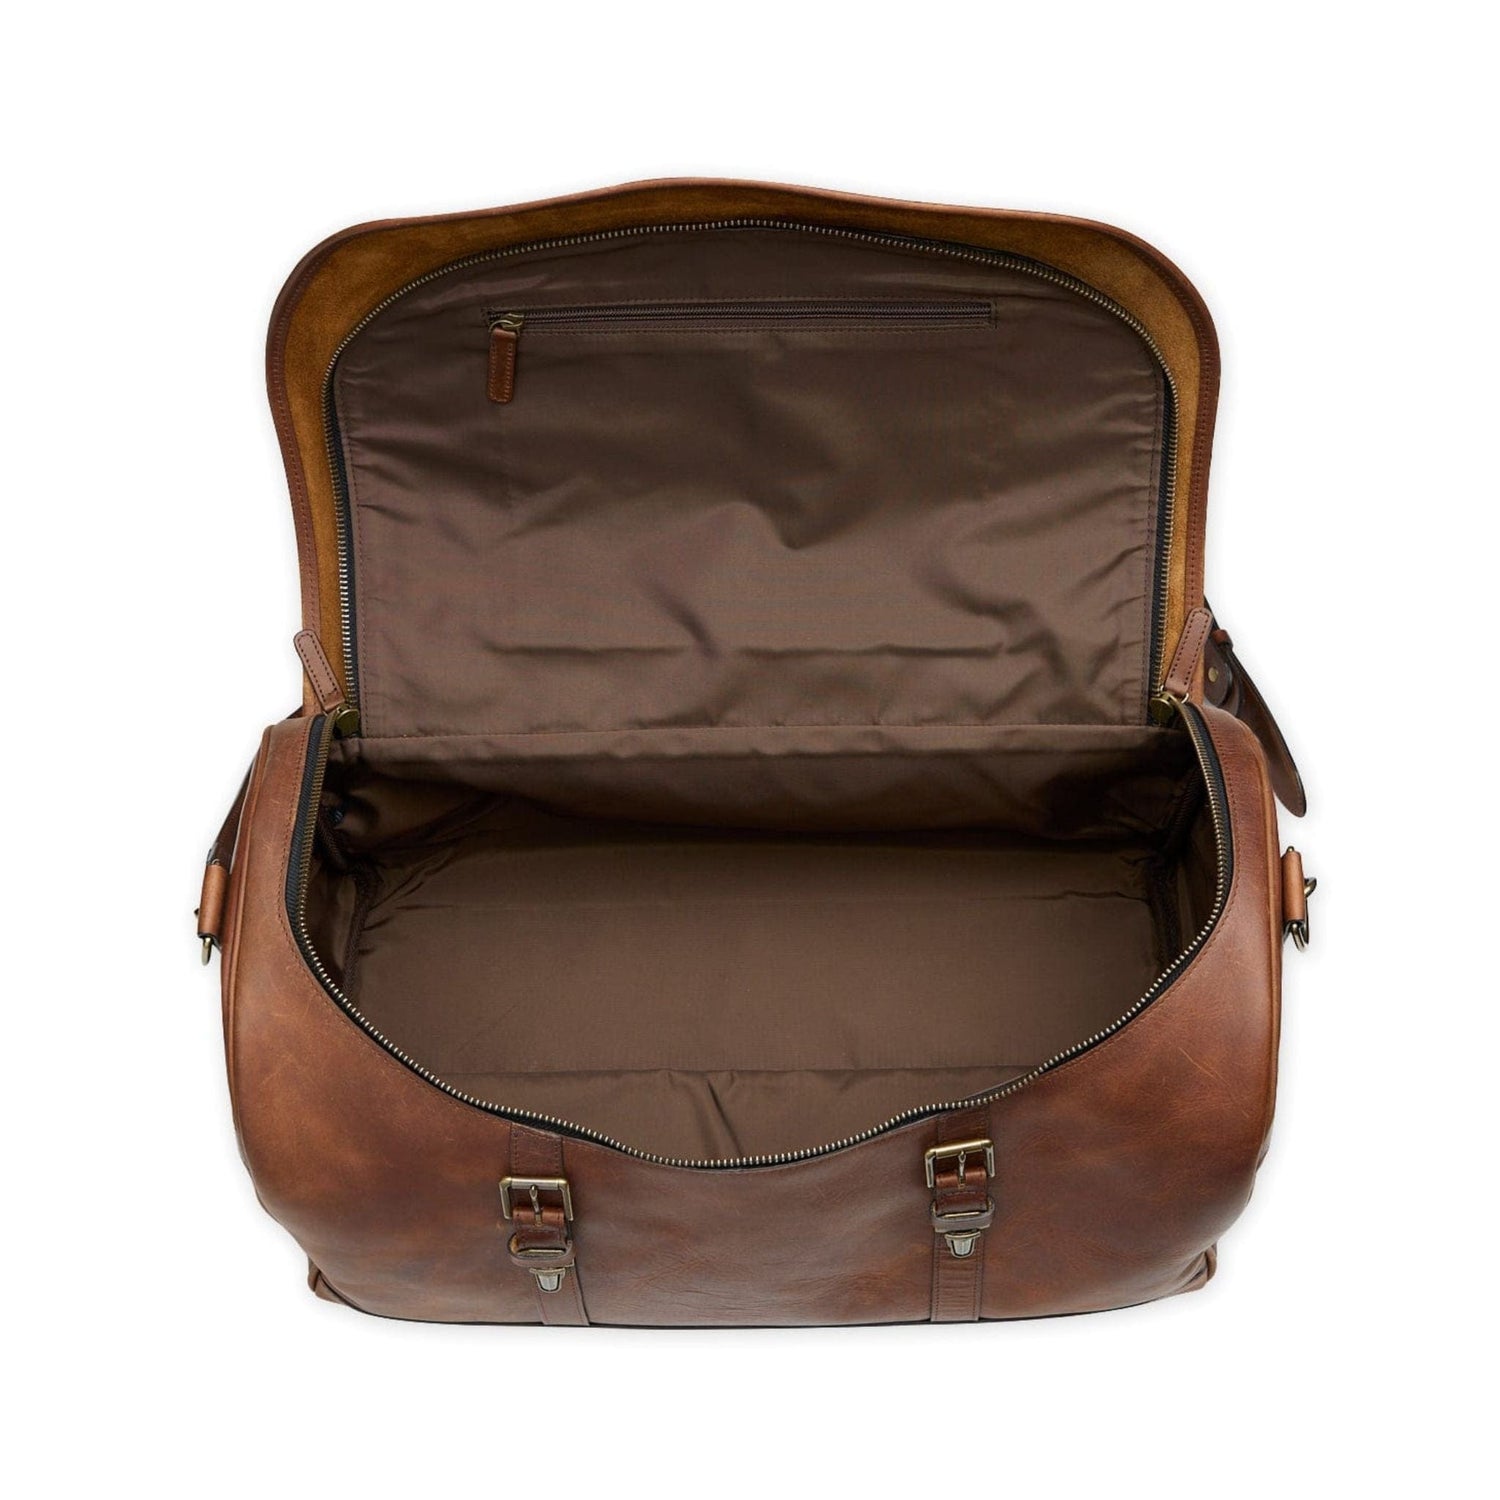 Leather Travel Bag Walnut Brown (TB-127B) – Canada Leather Store